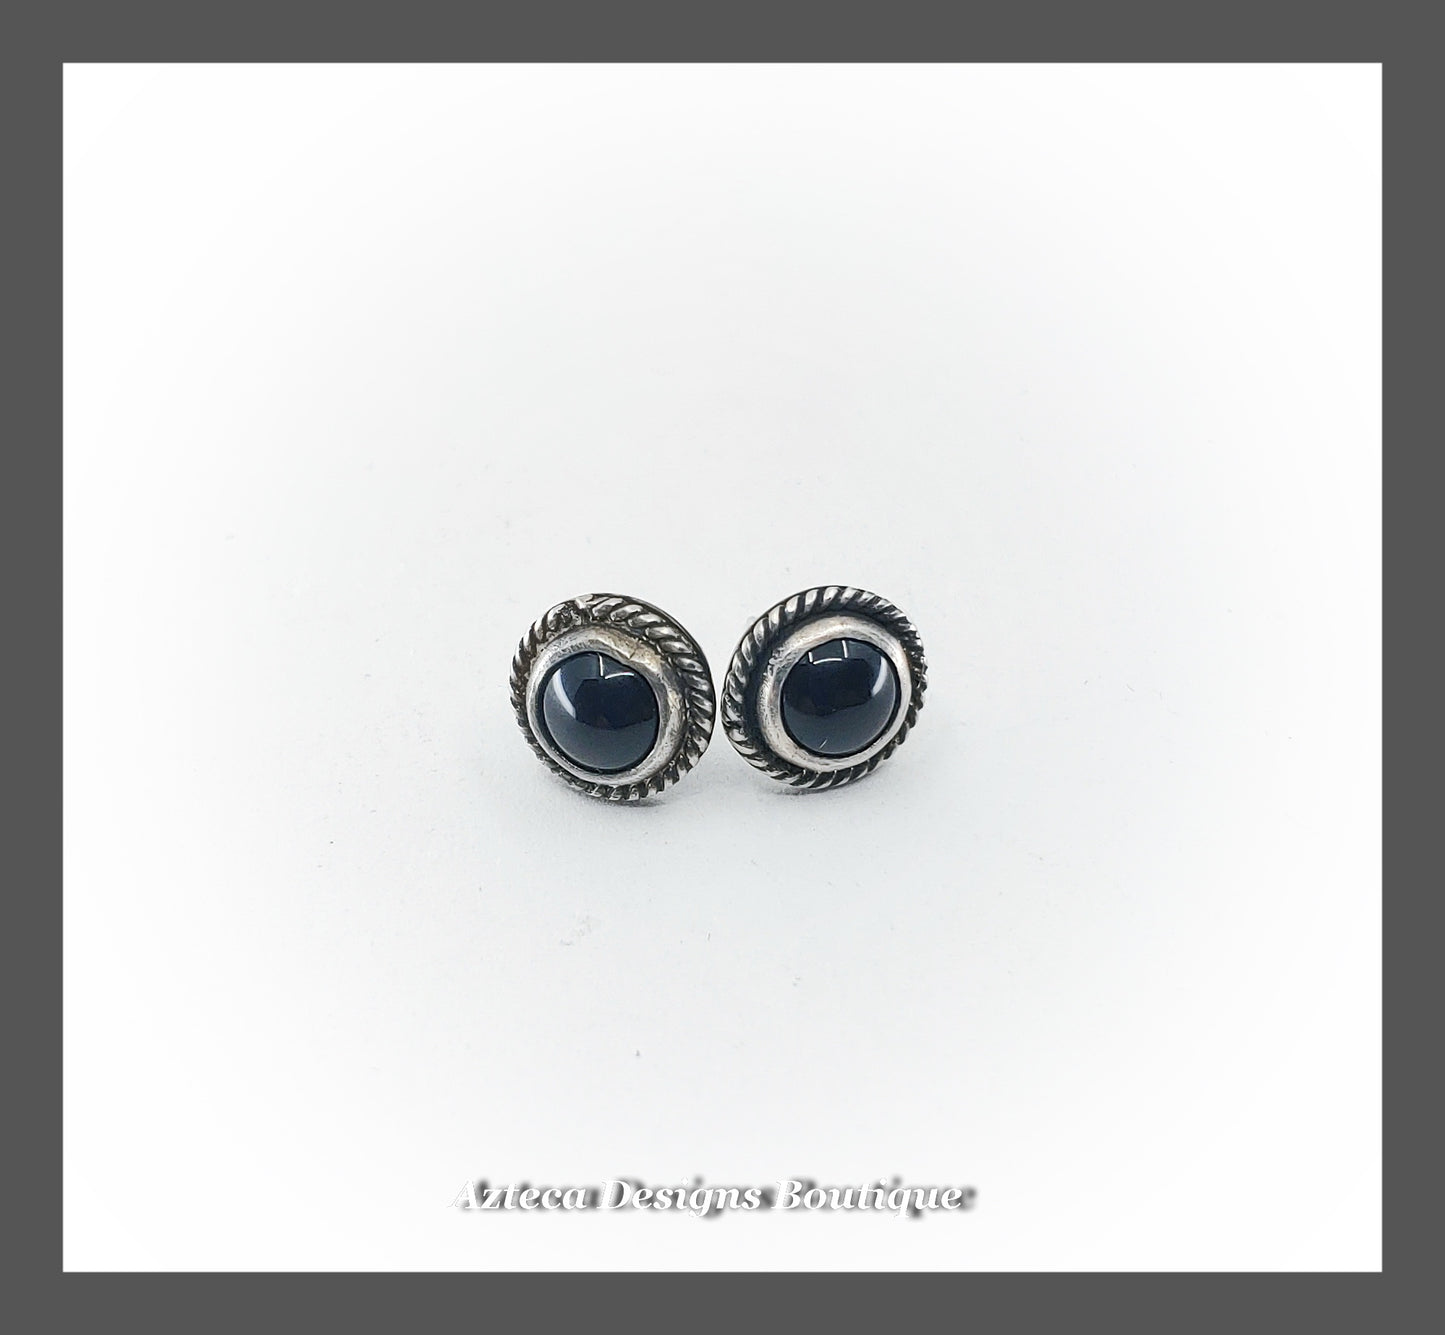 Black Onyx + Hand Fabricated Sterling Silver Post Earrings